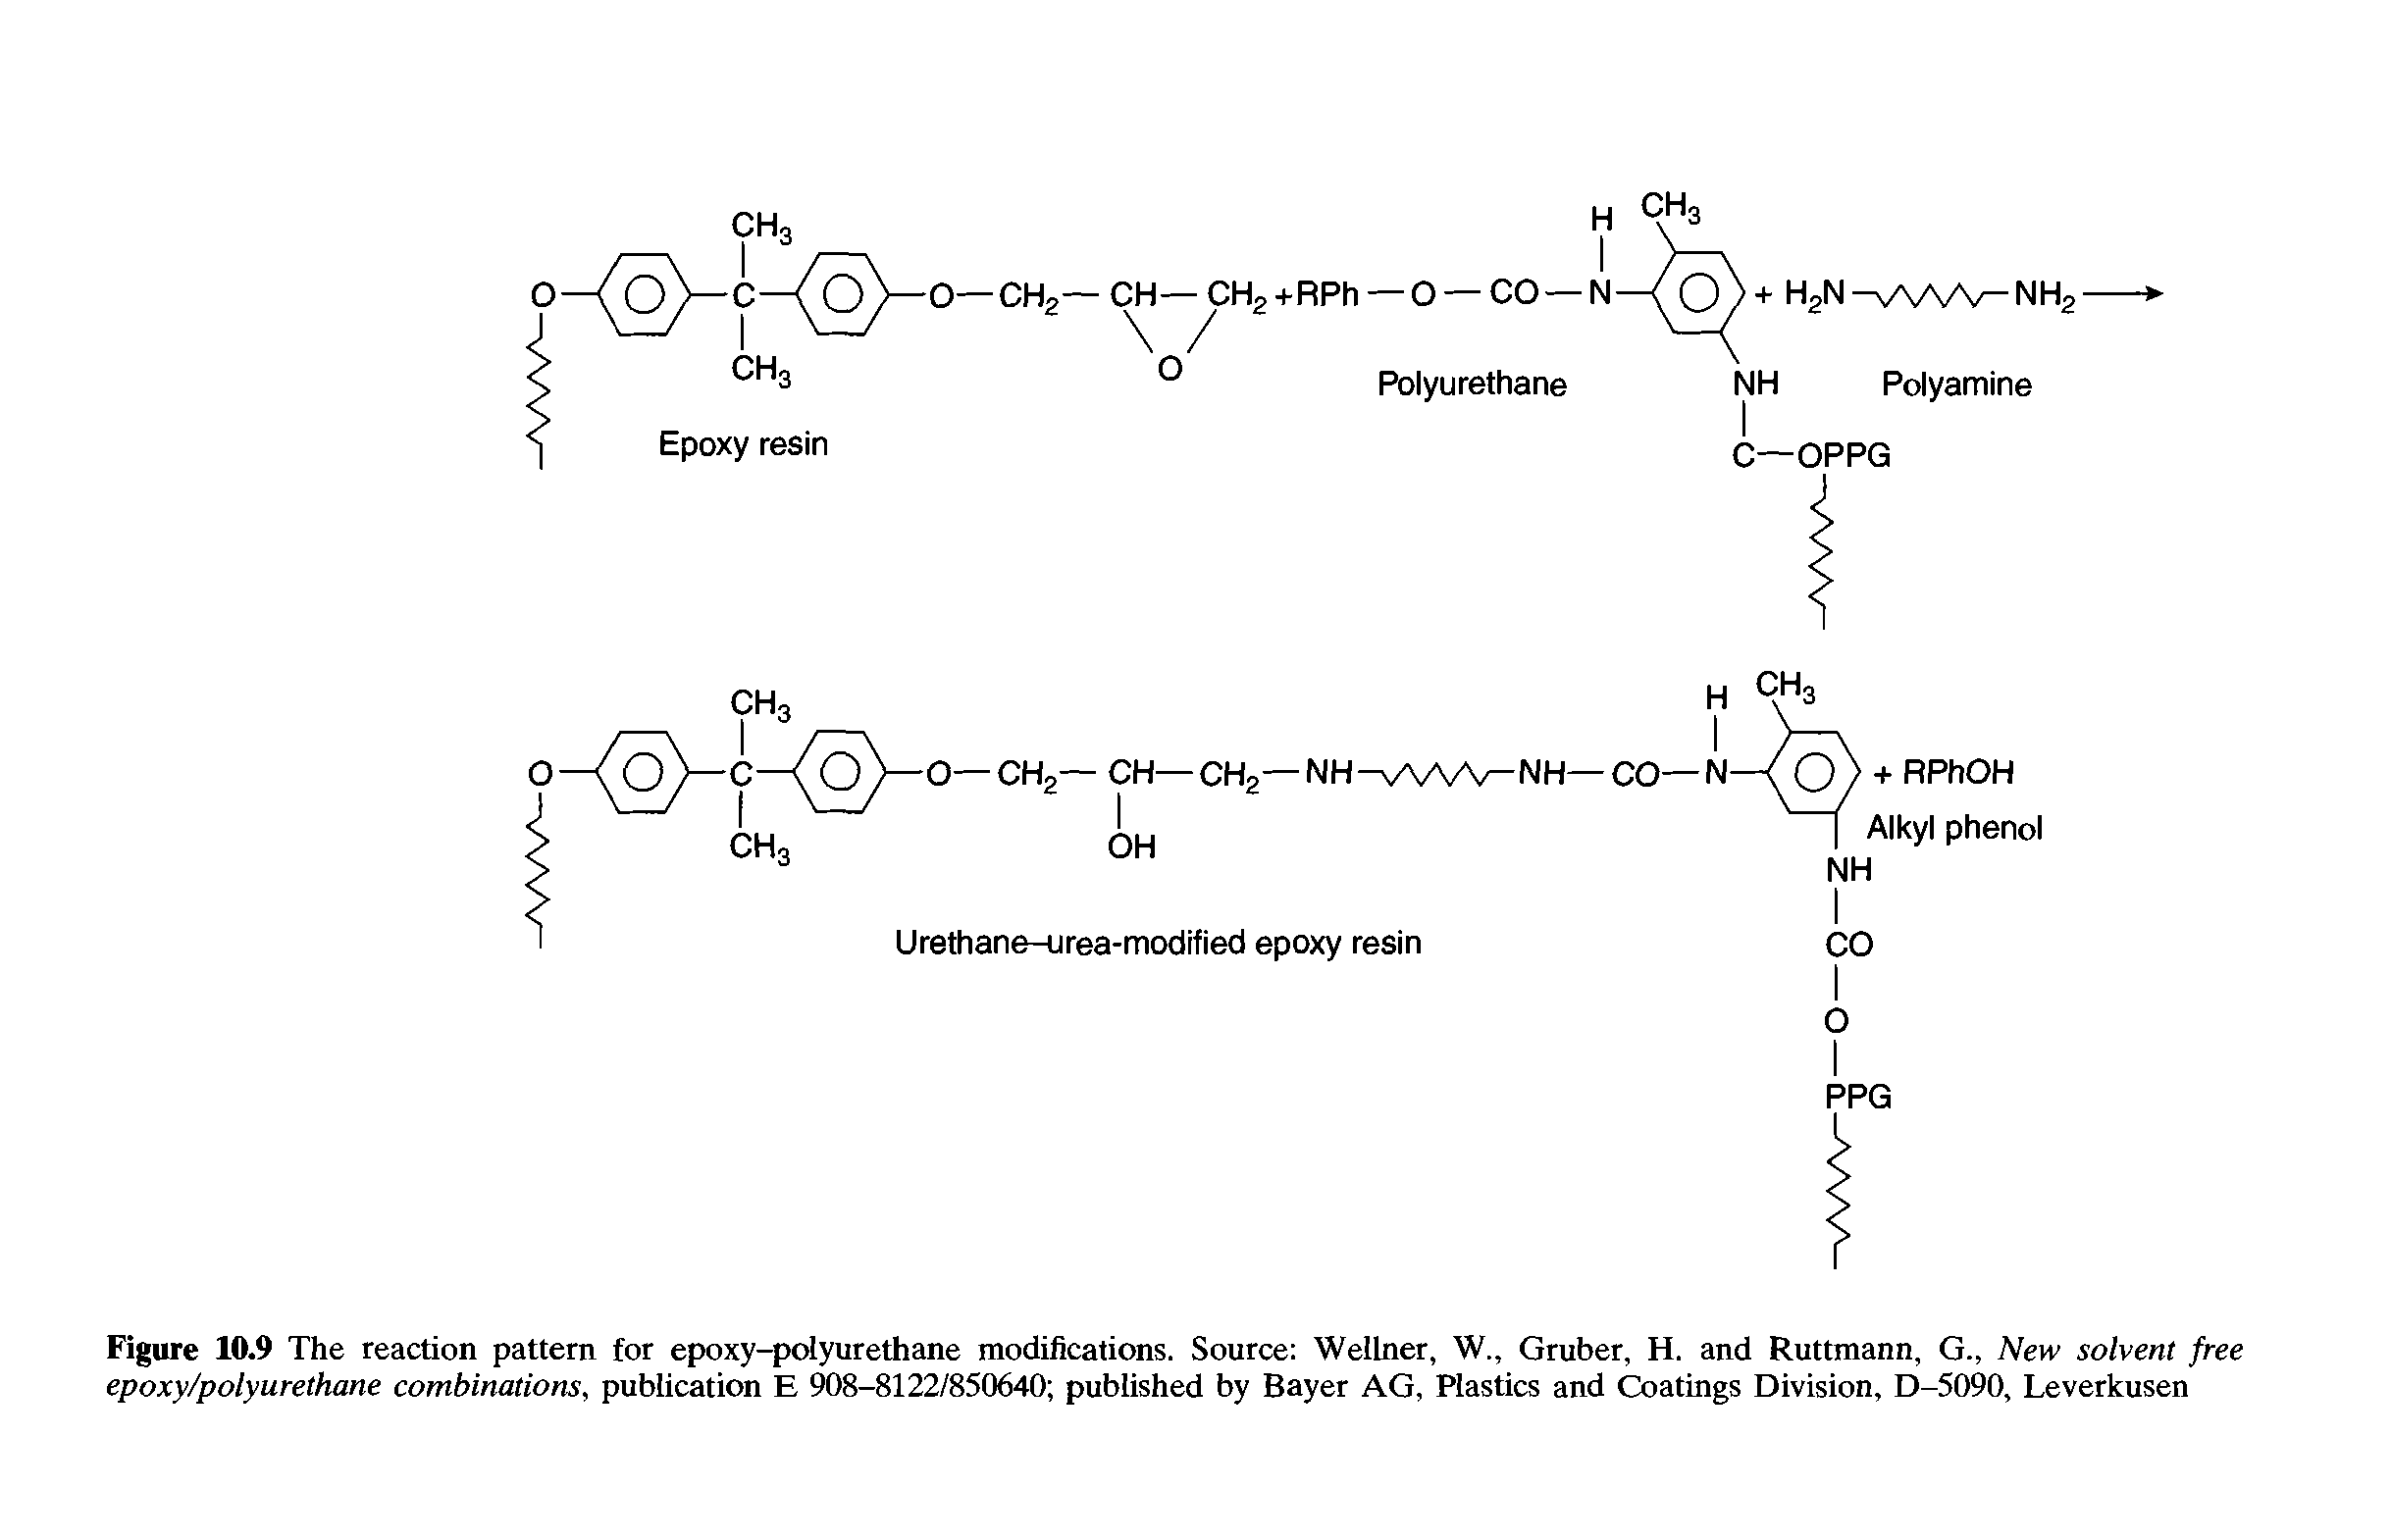 Figure 10.9 The reaction pattern for epoxy-polyurethane modifications. Source Wellner, W., Gruber, H. and Ruttmann, G., New solvent free epoxy/polyurethane combinations, publication E 908-8122/850640 published by Bayer AG, Plastics and Coatings Division, D-5090, Leverkusen...